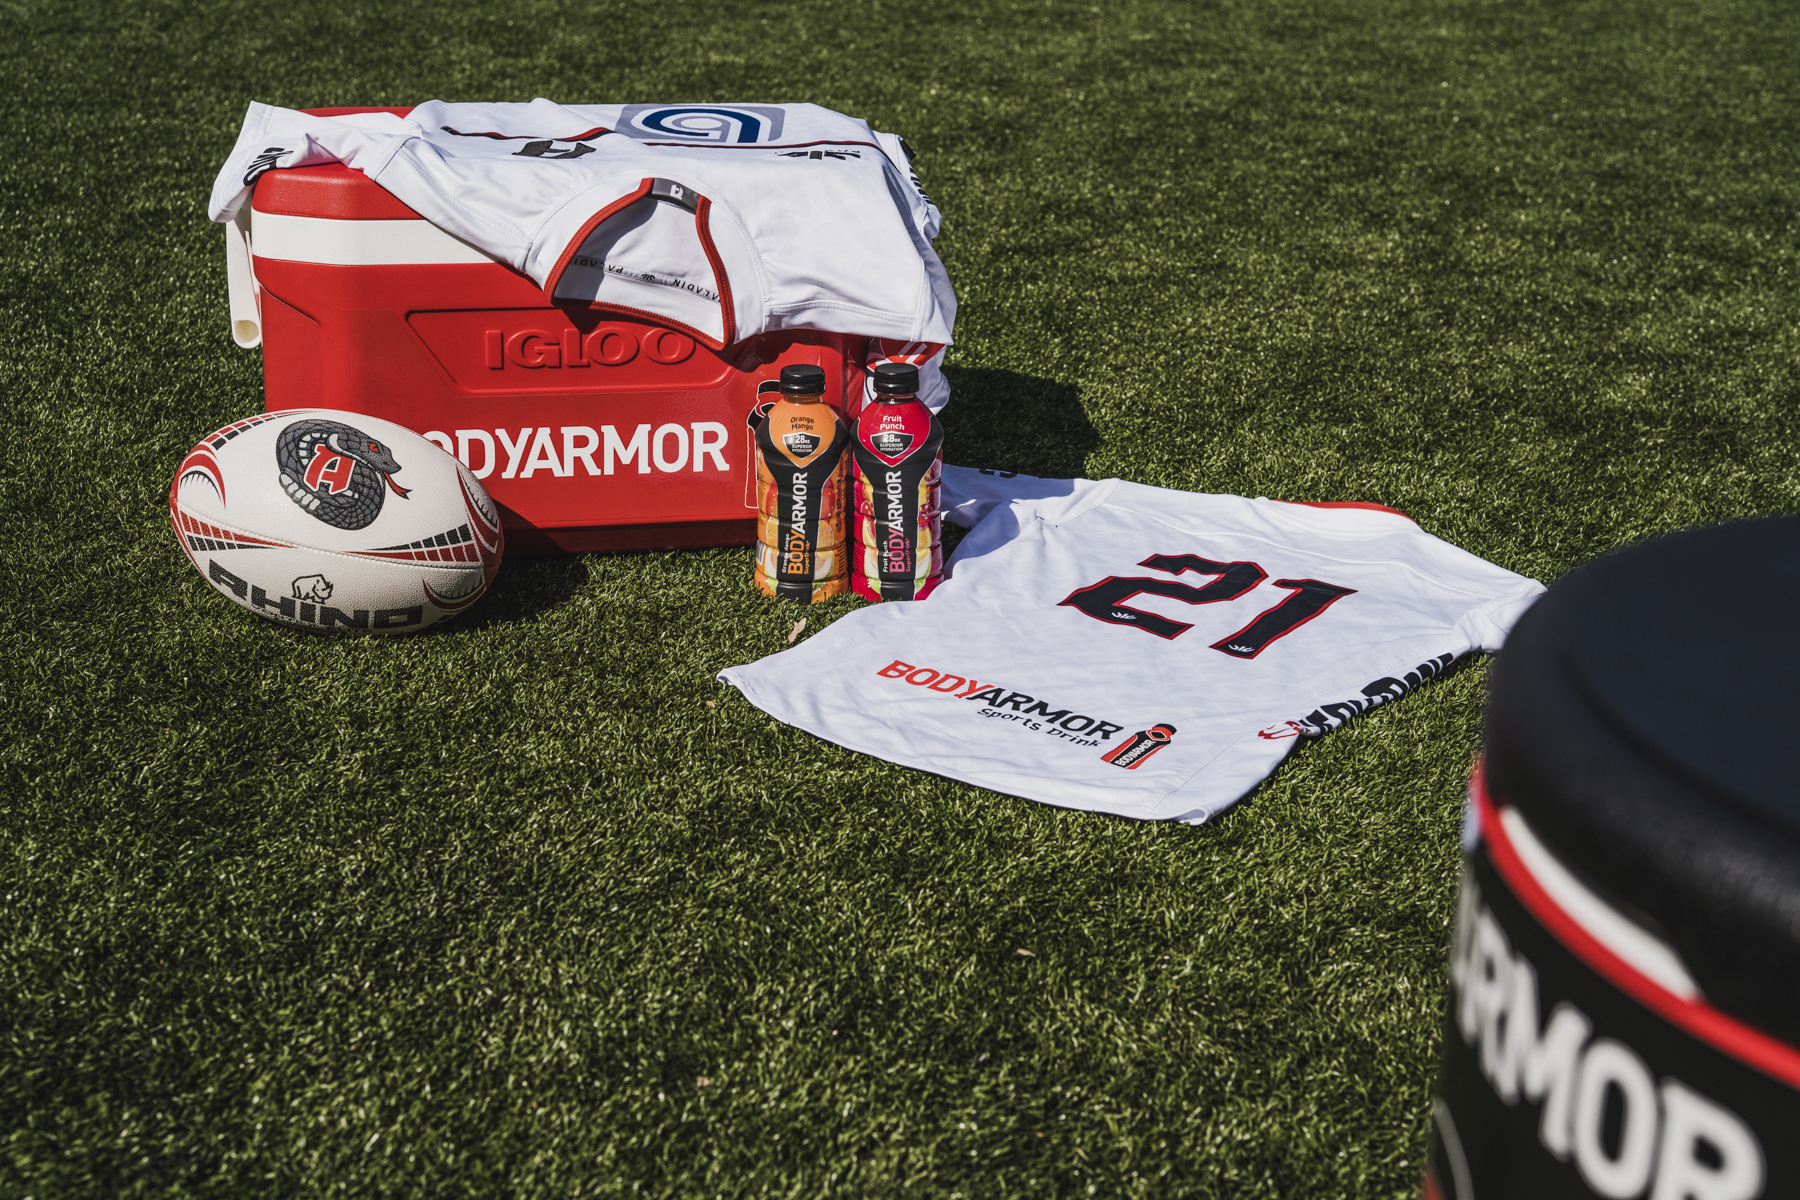 RUGBY ATL ANNOUNCES PARTNERSHIP WITH COCA-COLA UNITED AND BODYARMOR